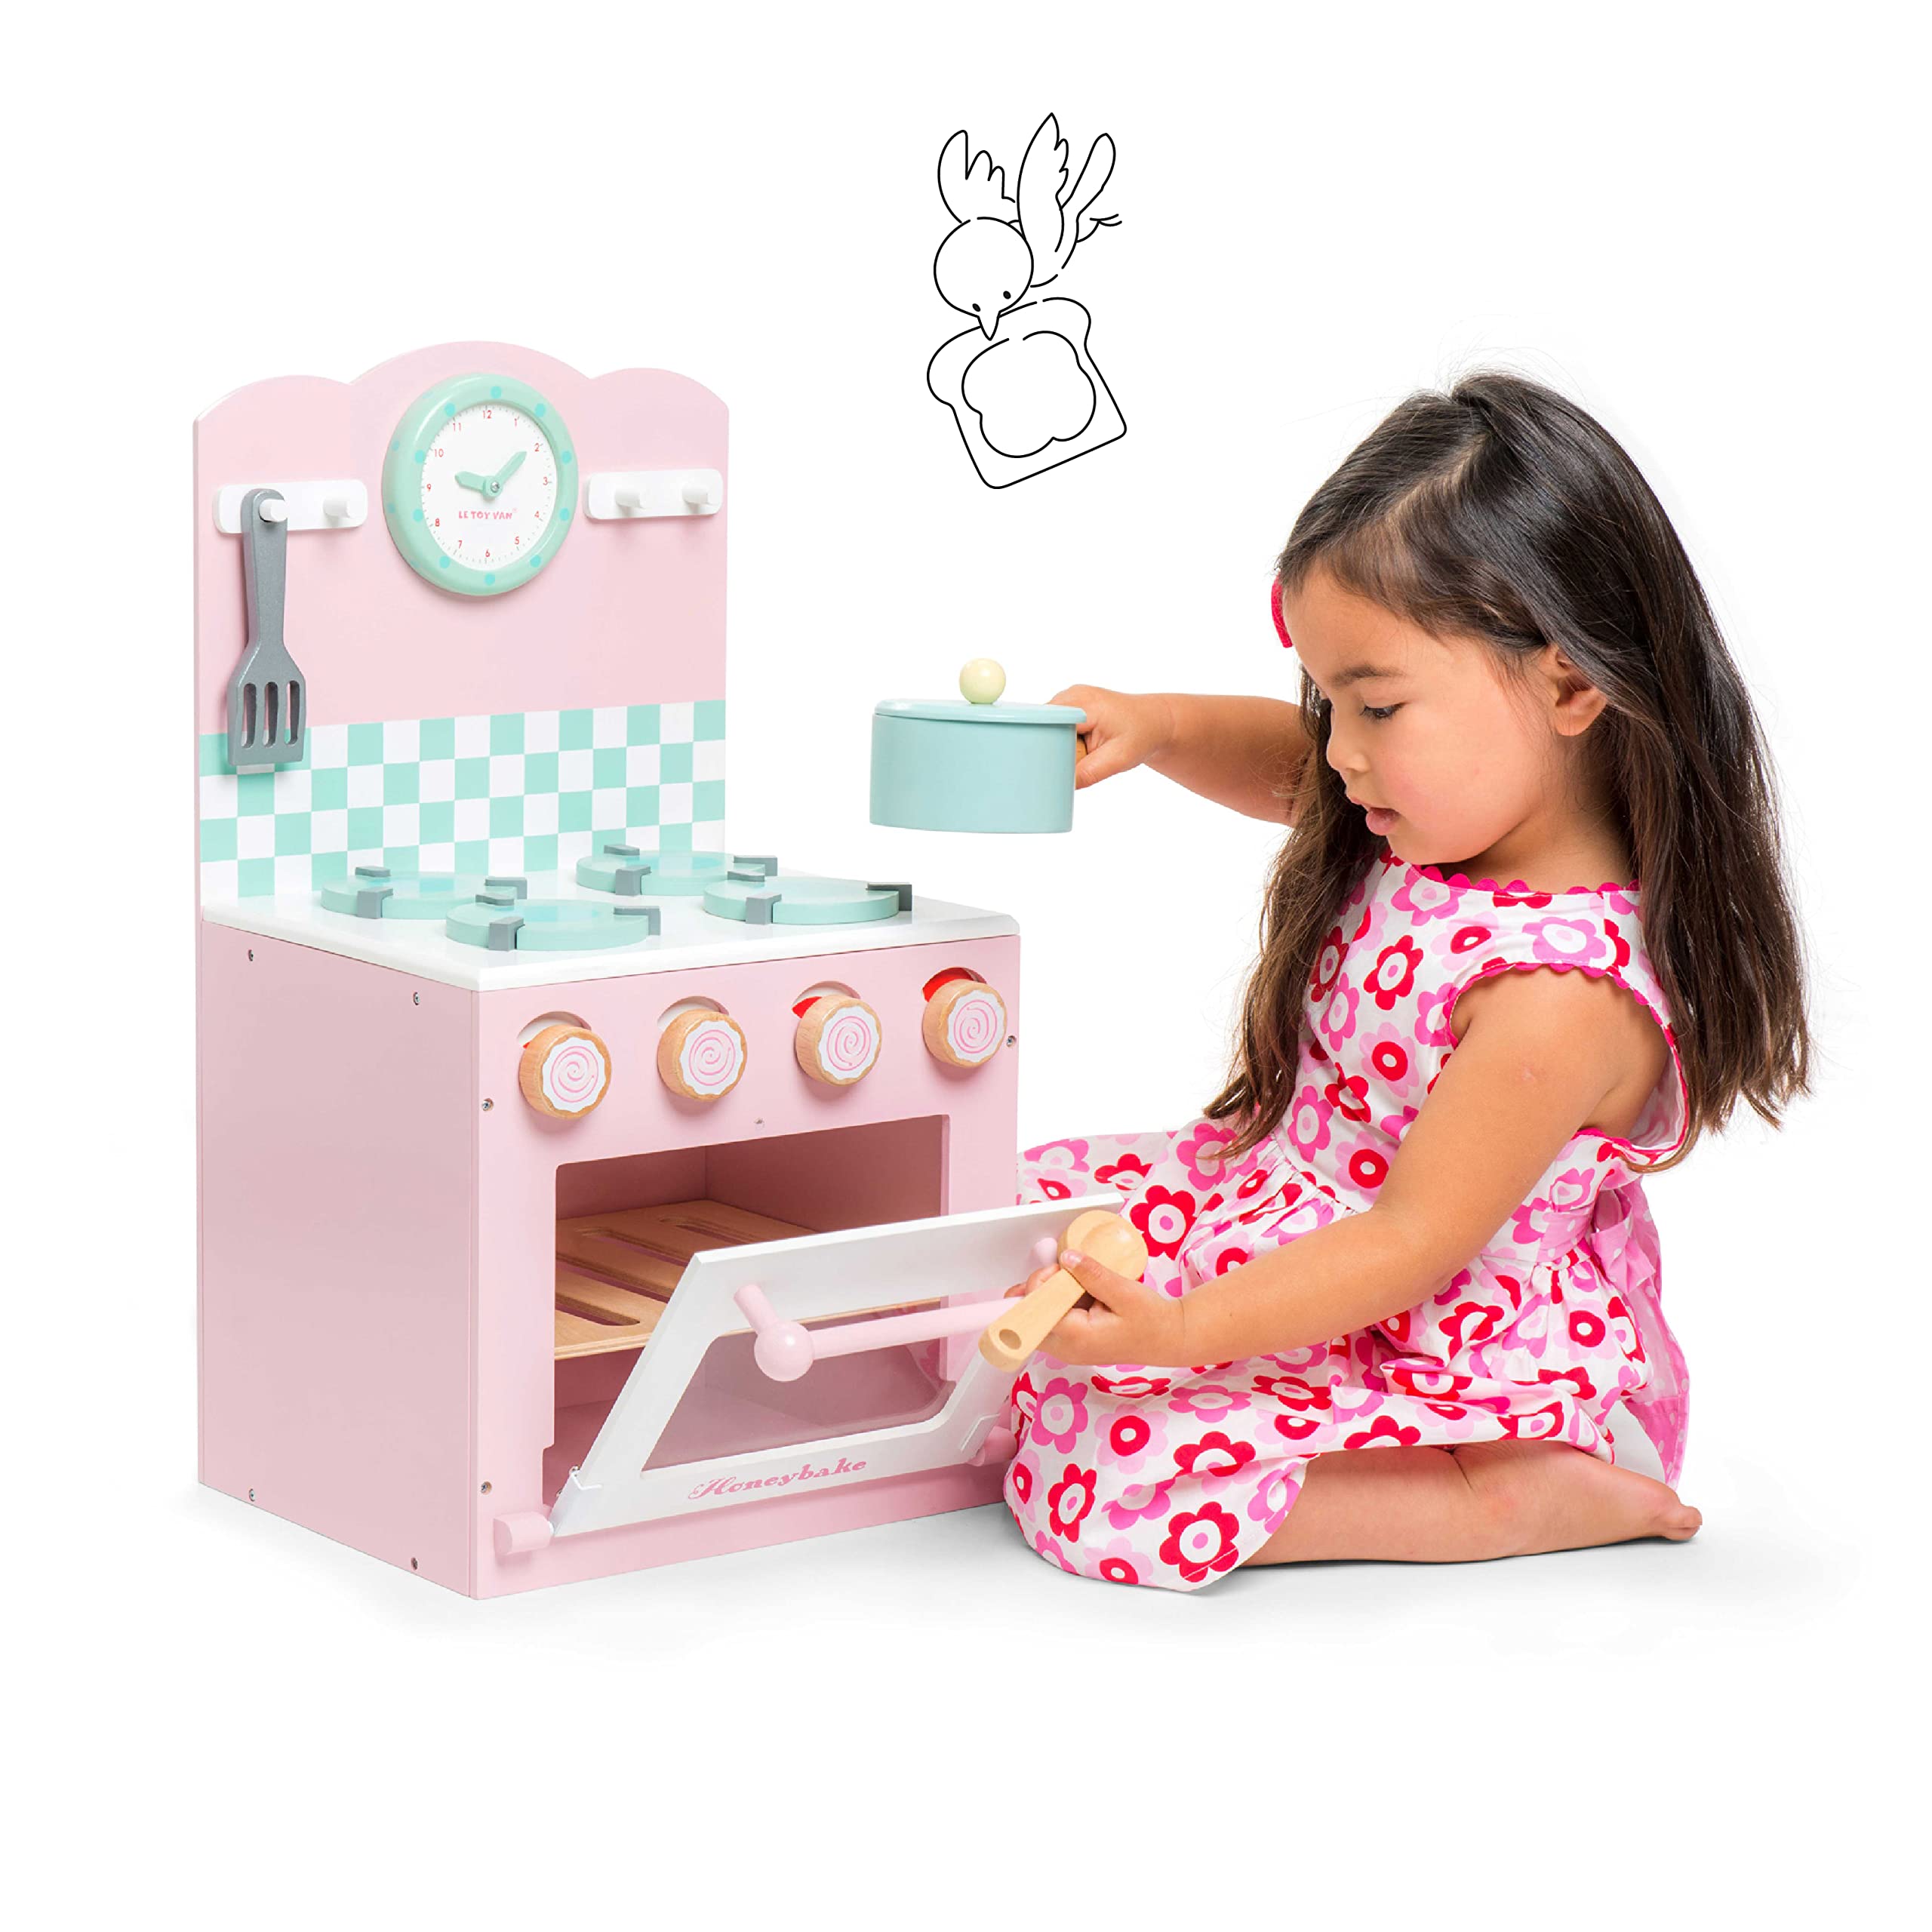 Le Toy Van - Colorful Wooden Honeybake Oven & Hob Pink Set | Wood Pretend Play Kitchen Toy Set | Girls and Boys Role Play Toy Kitchen Accessories